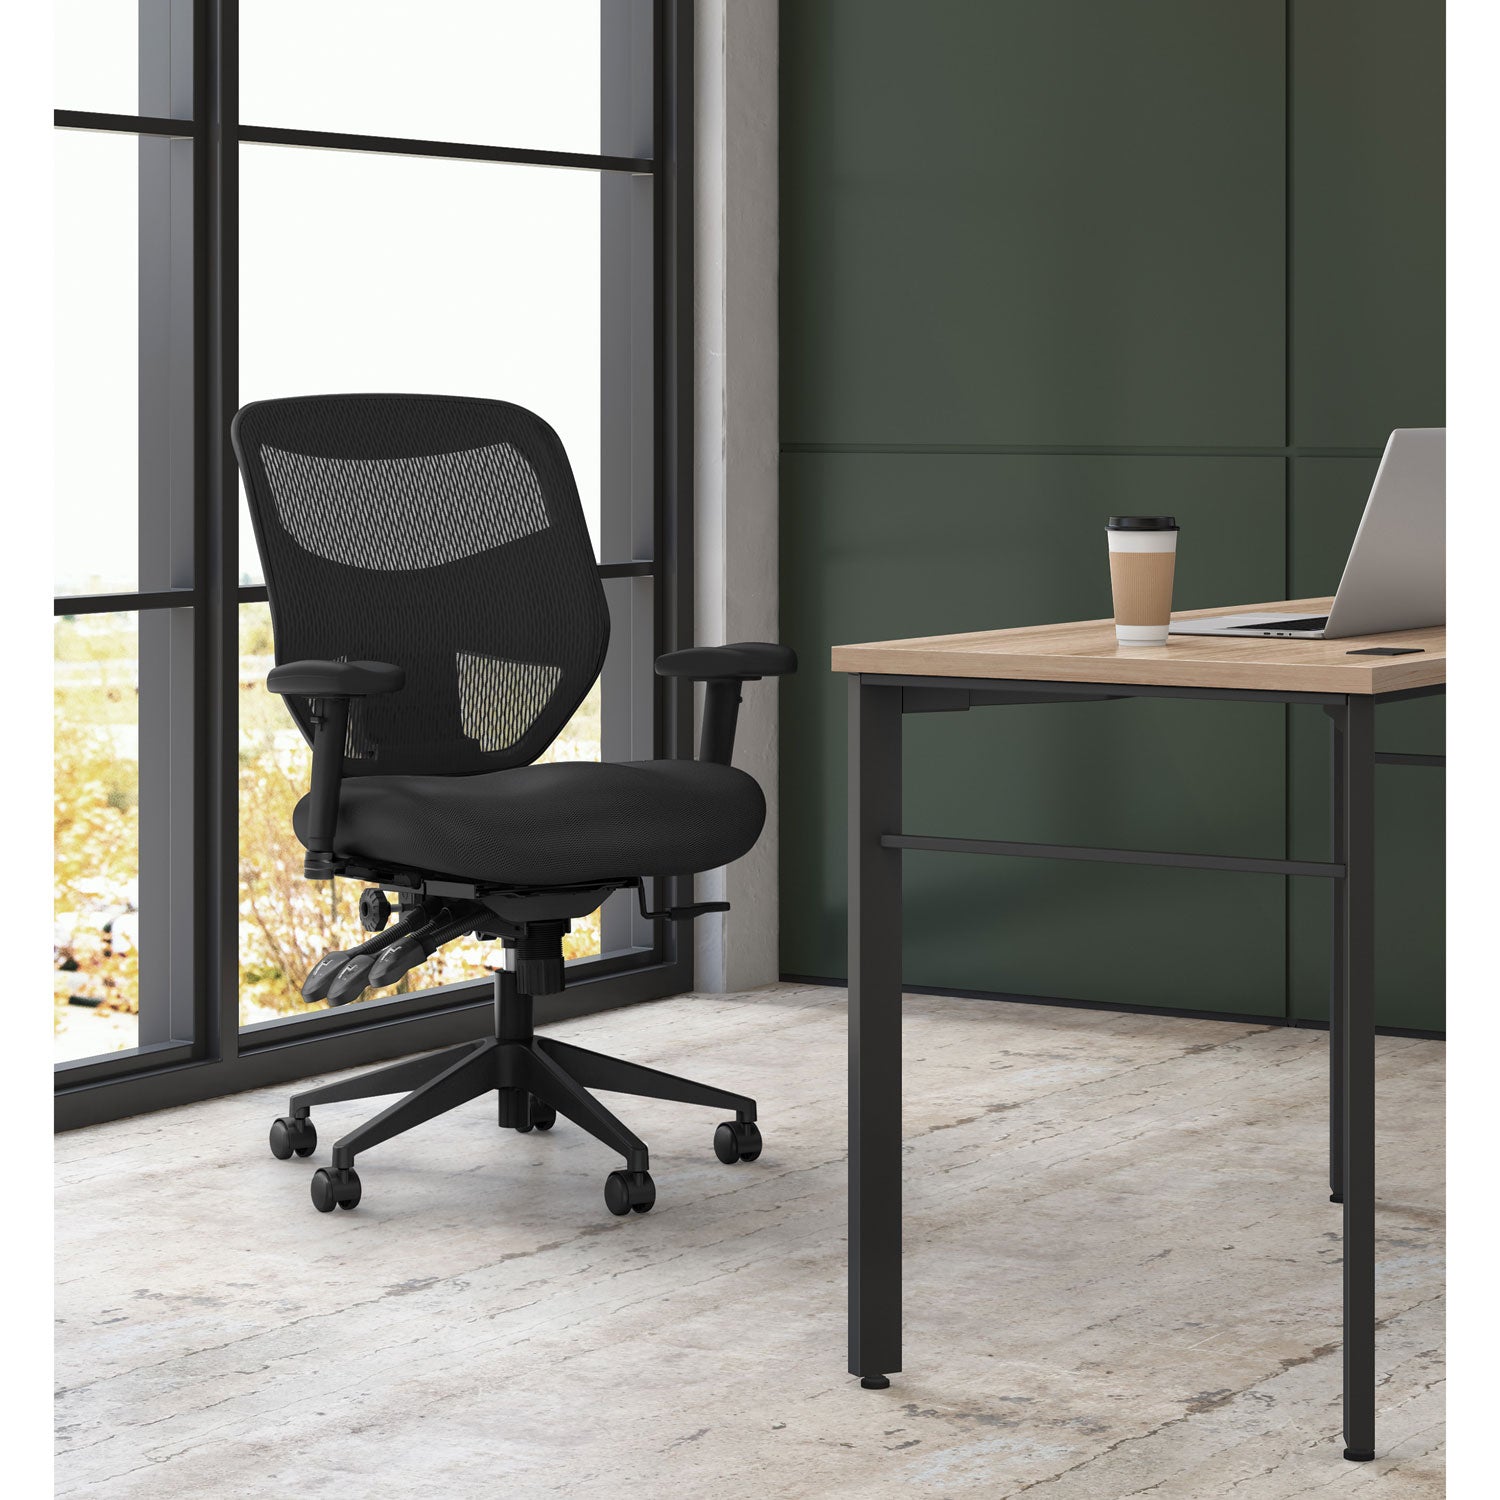 VL532 Mesh High-Back Task Chair, Supports Up to 250 lb, 17" to 20.5" Seat Height, Black - 